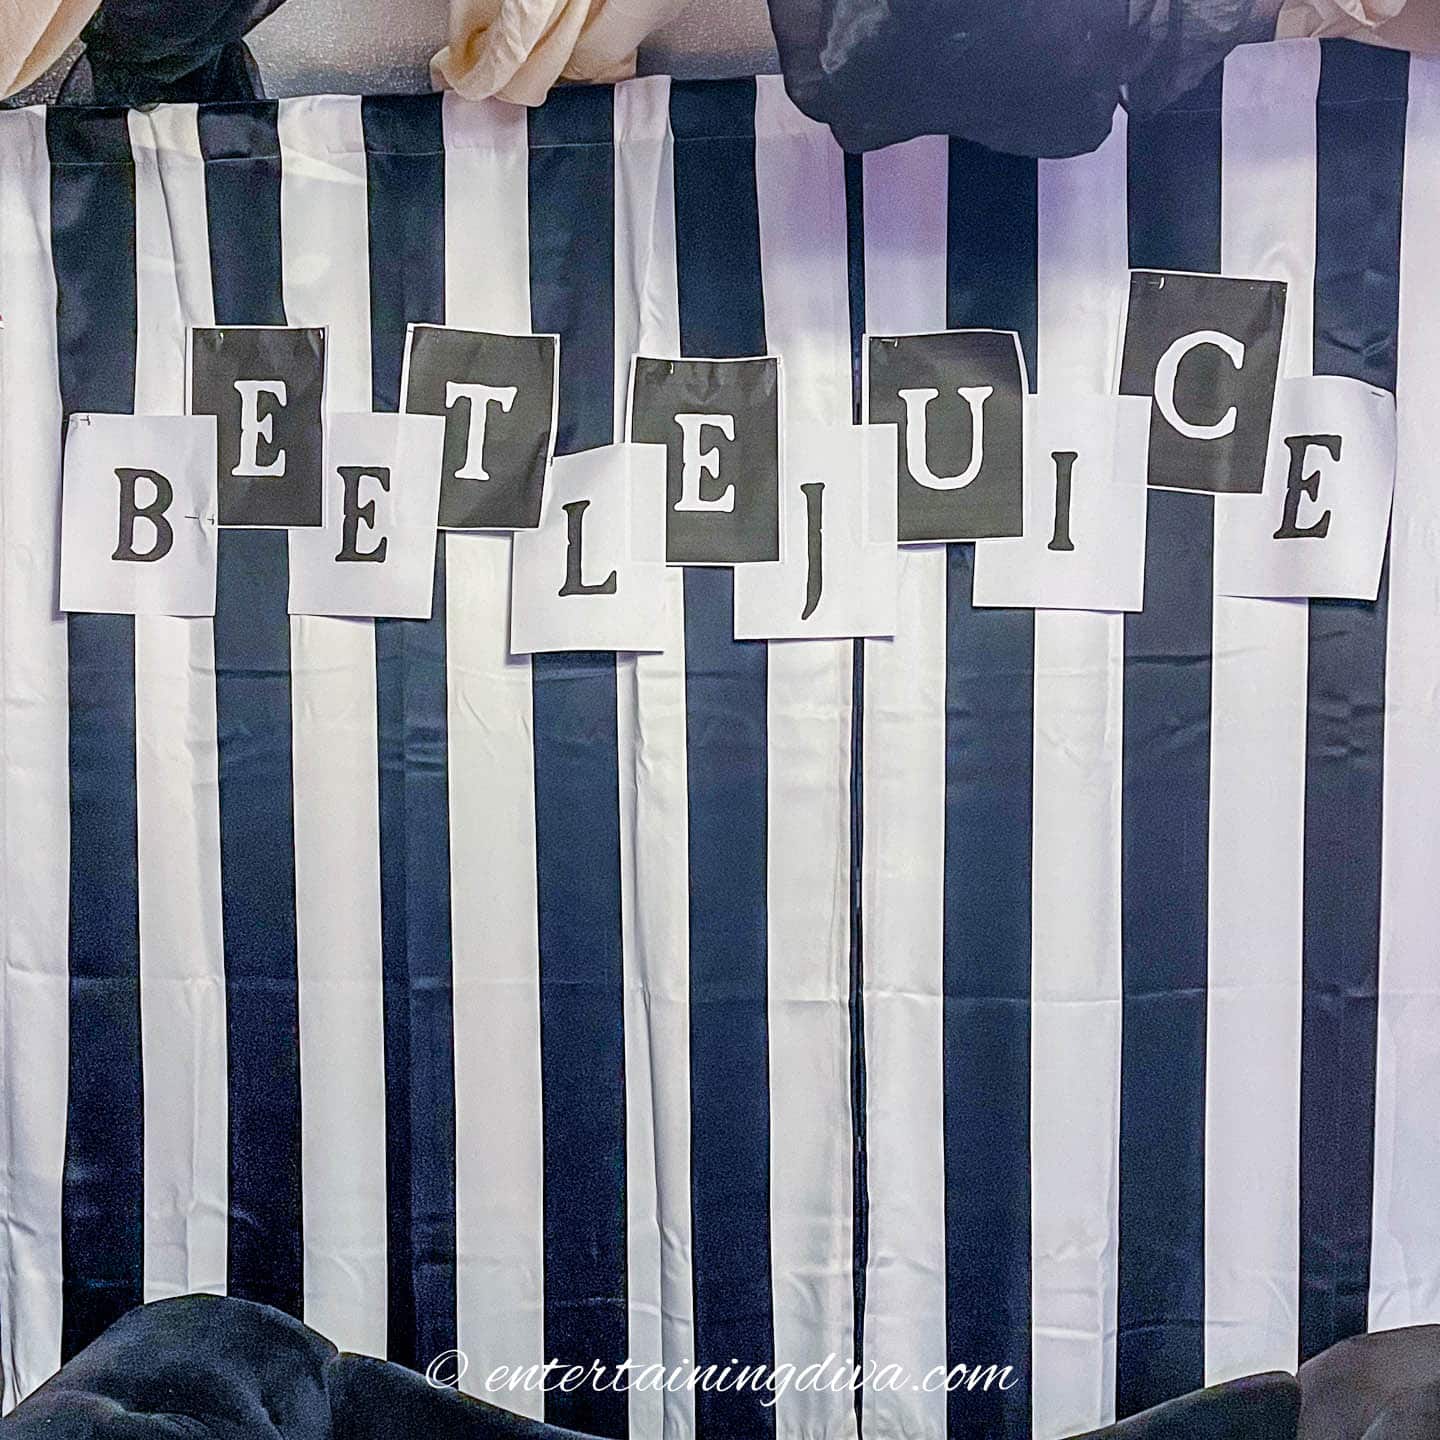 DIY Beetlejuice banner hung on black and white striped curtains